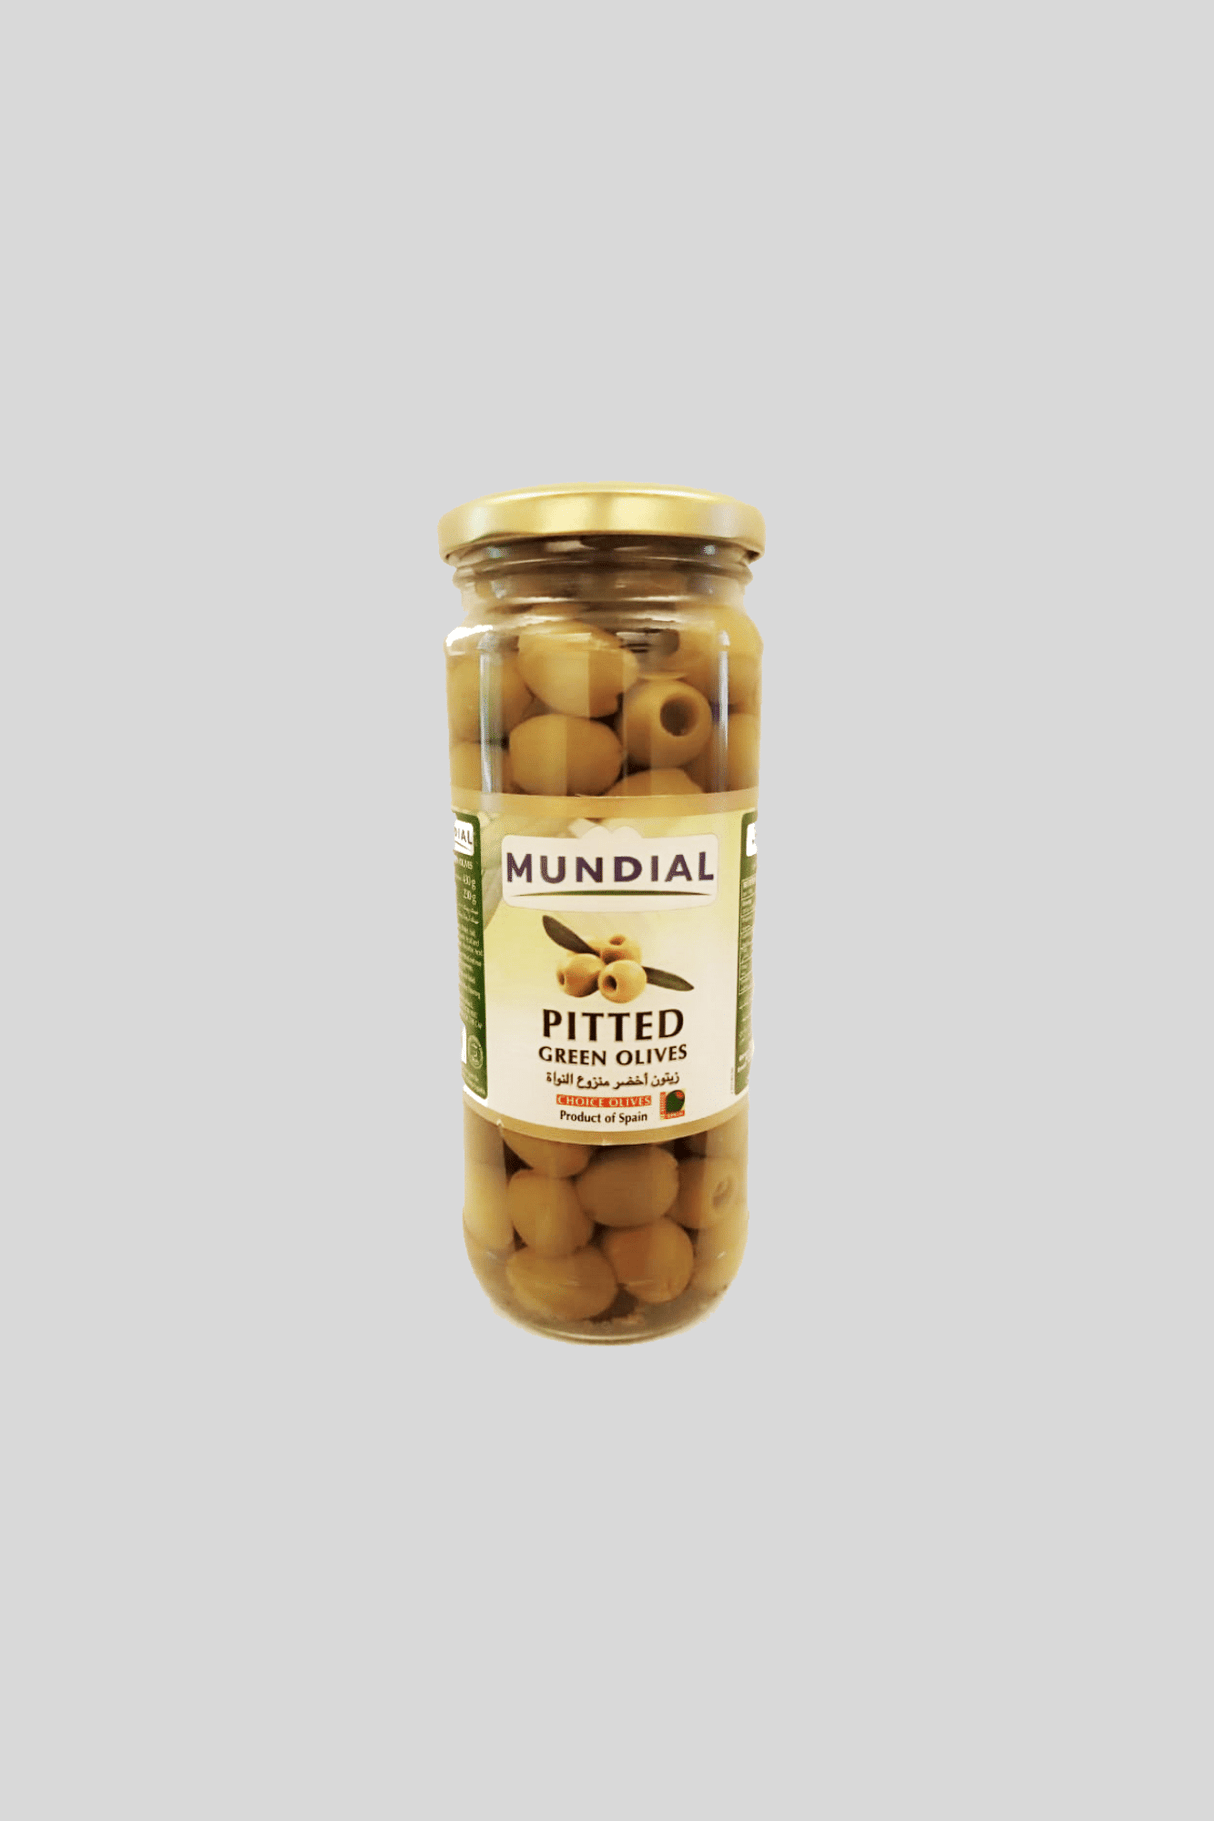 mundial olives pitted green 230g